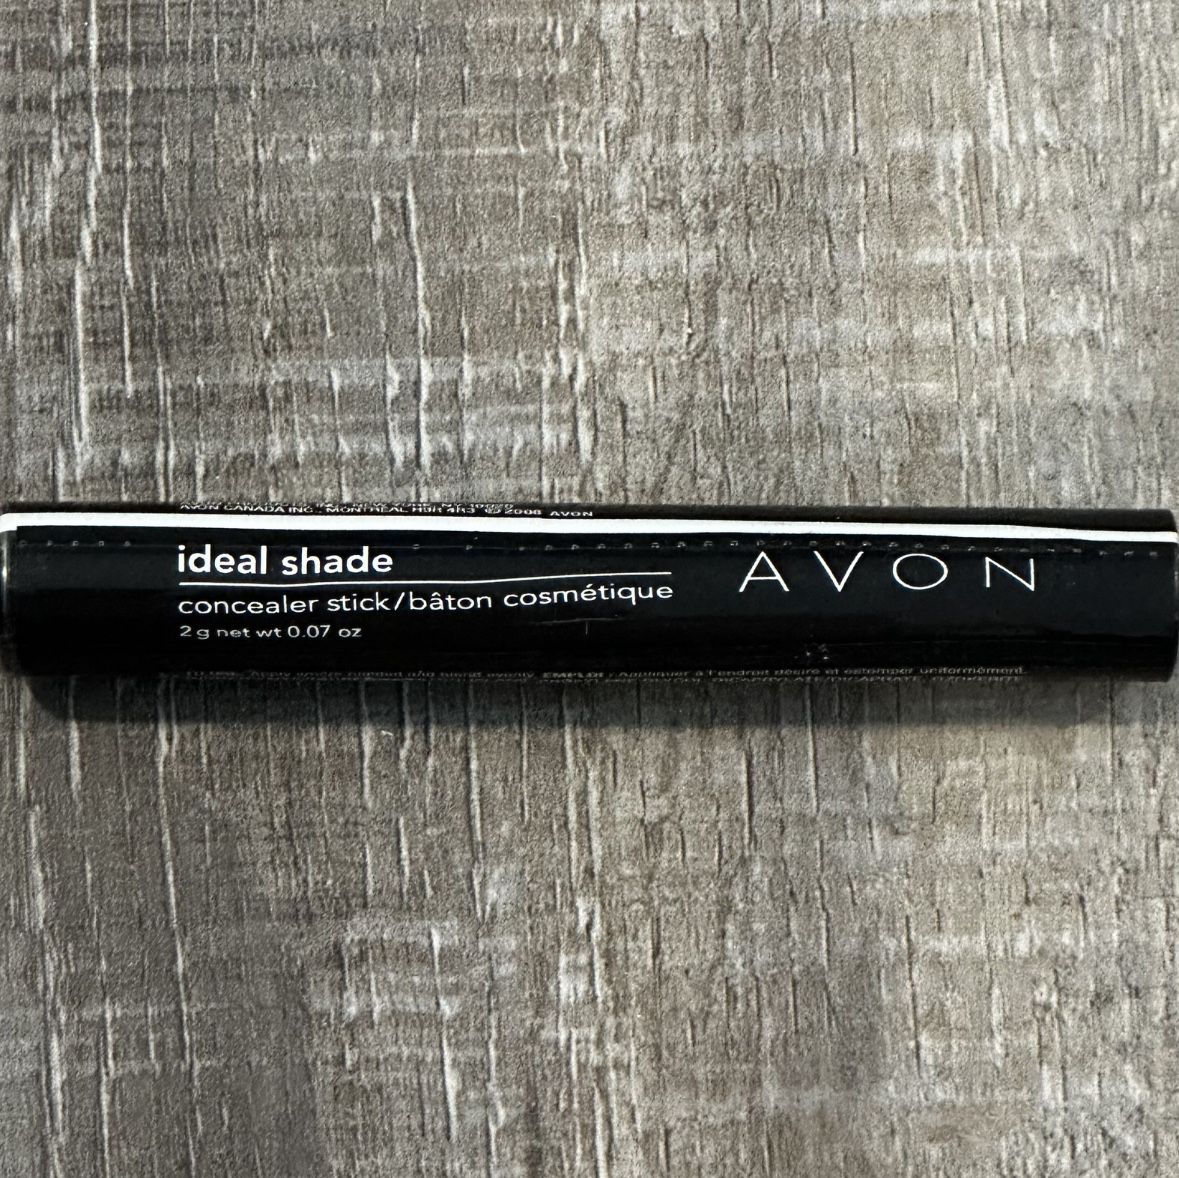 New Avon Ideal Shade Concealer Stick In Light